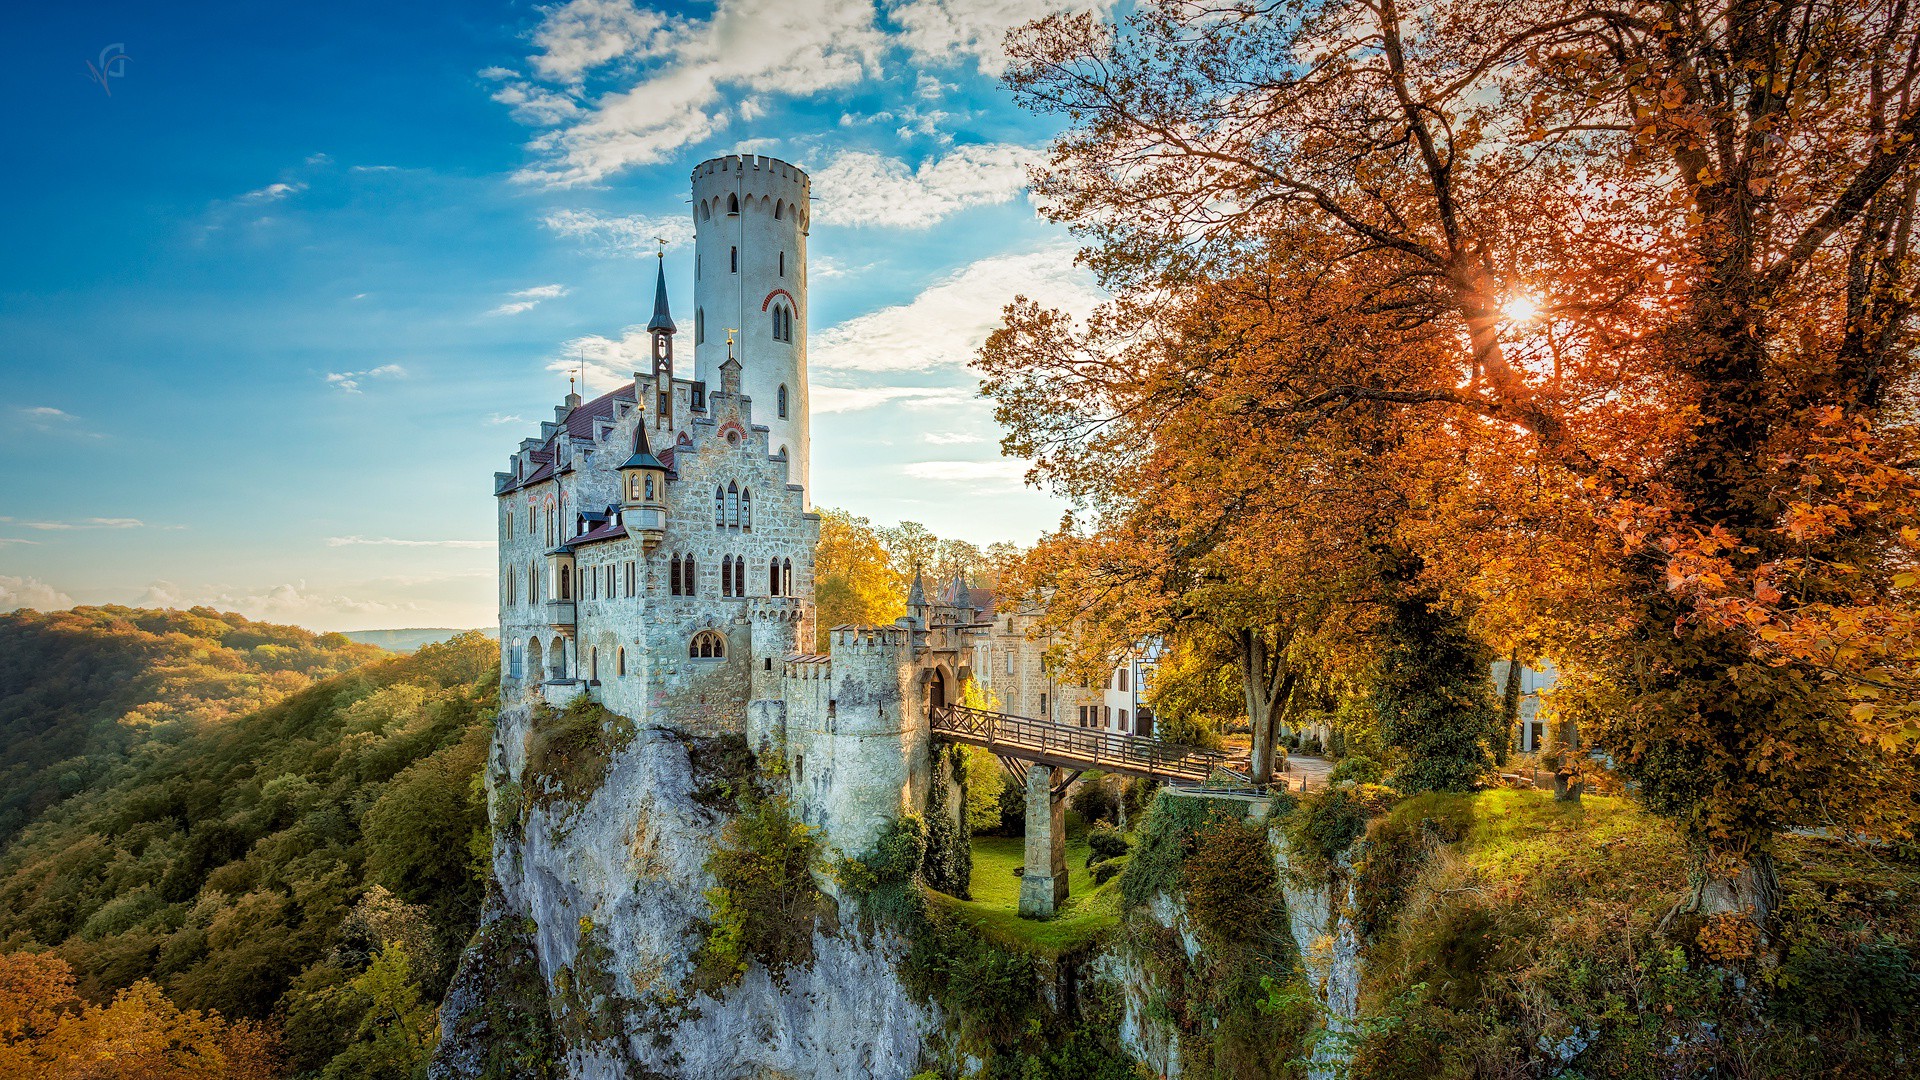 Wallpaper, 1920x1080 px, architecture, bridge, castle, cliff, fall, forest, Germany, HDR, landscape, nature, old building, sunlight, tower, trees 1920x1080